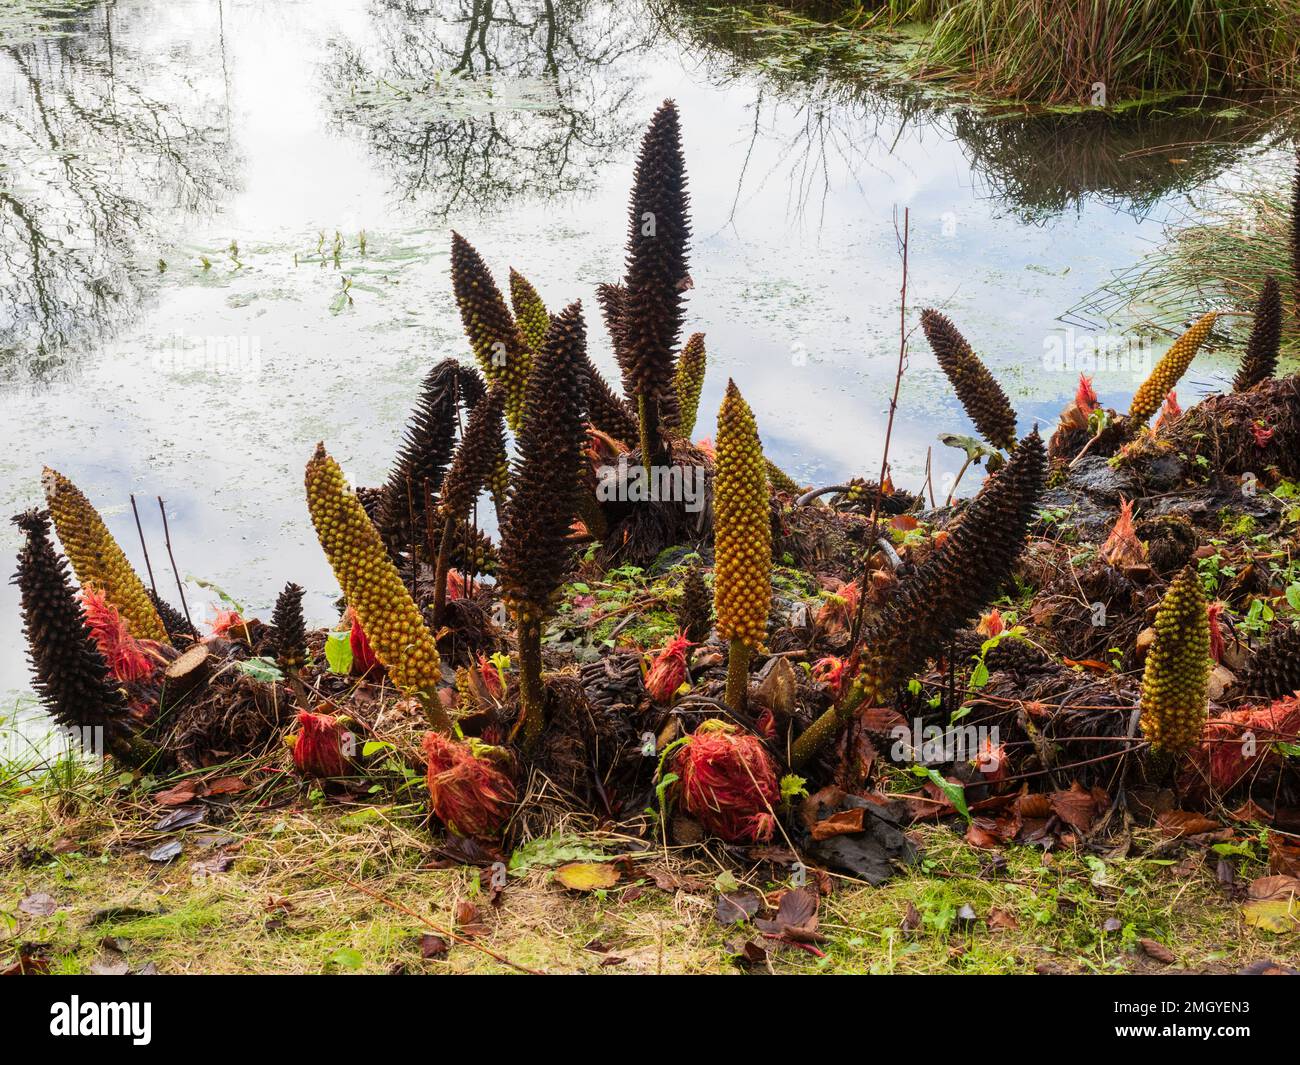 Winter flower spikes, red seeds and foilage buds of the giant marginal aquatic perennial Gunnera manicata Stock Photo